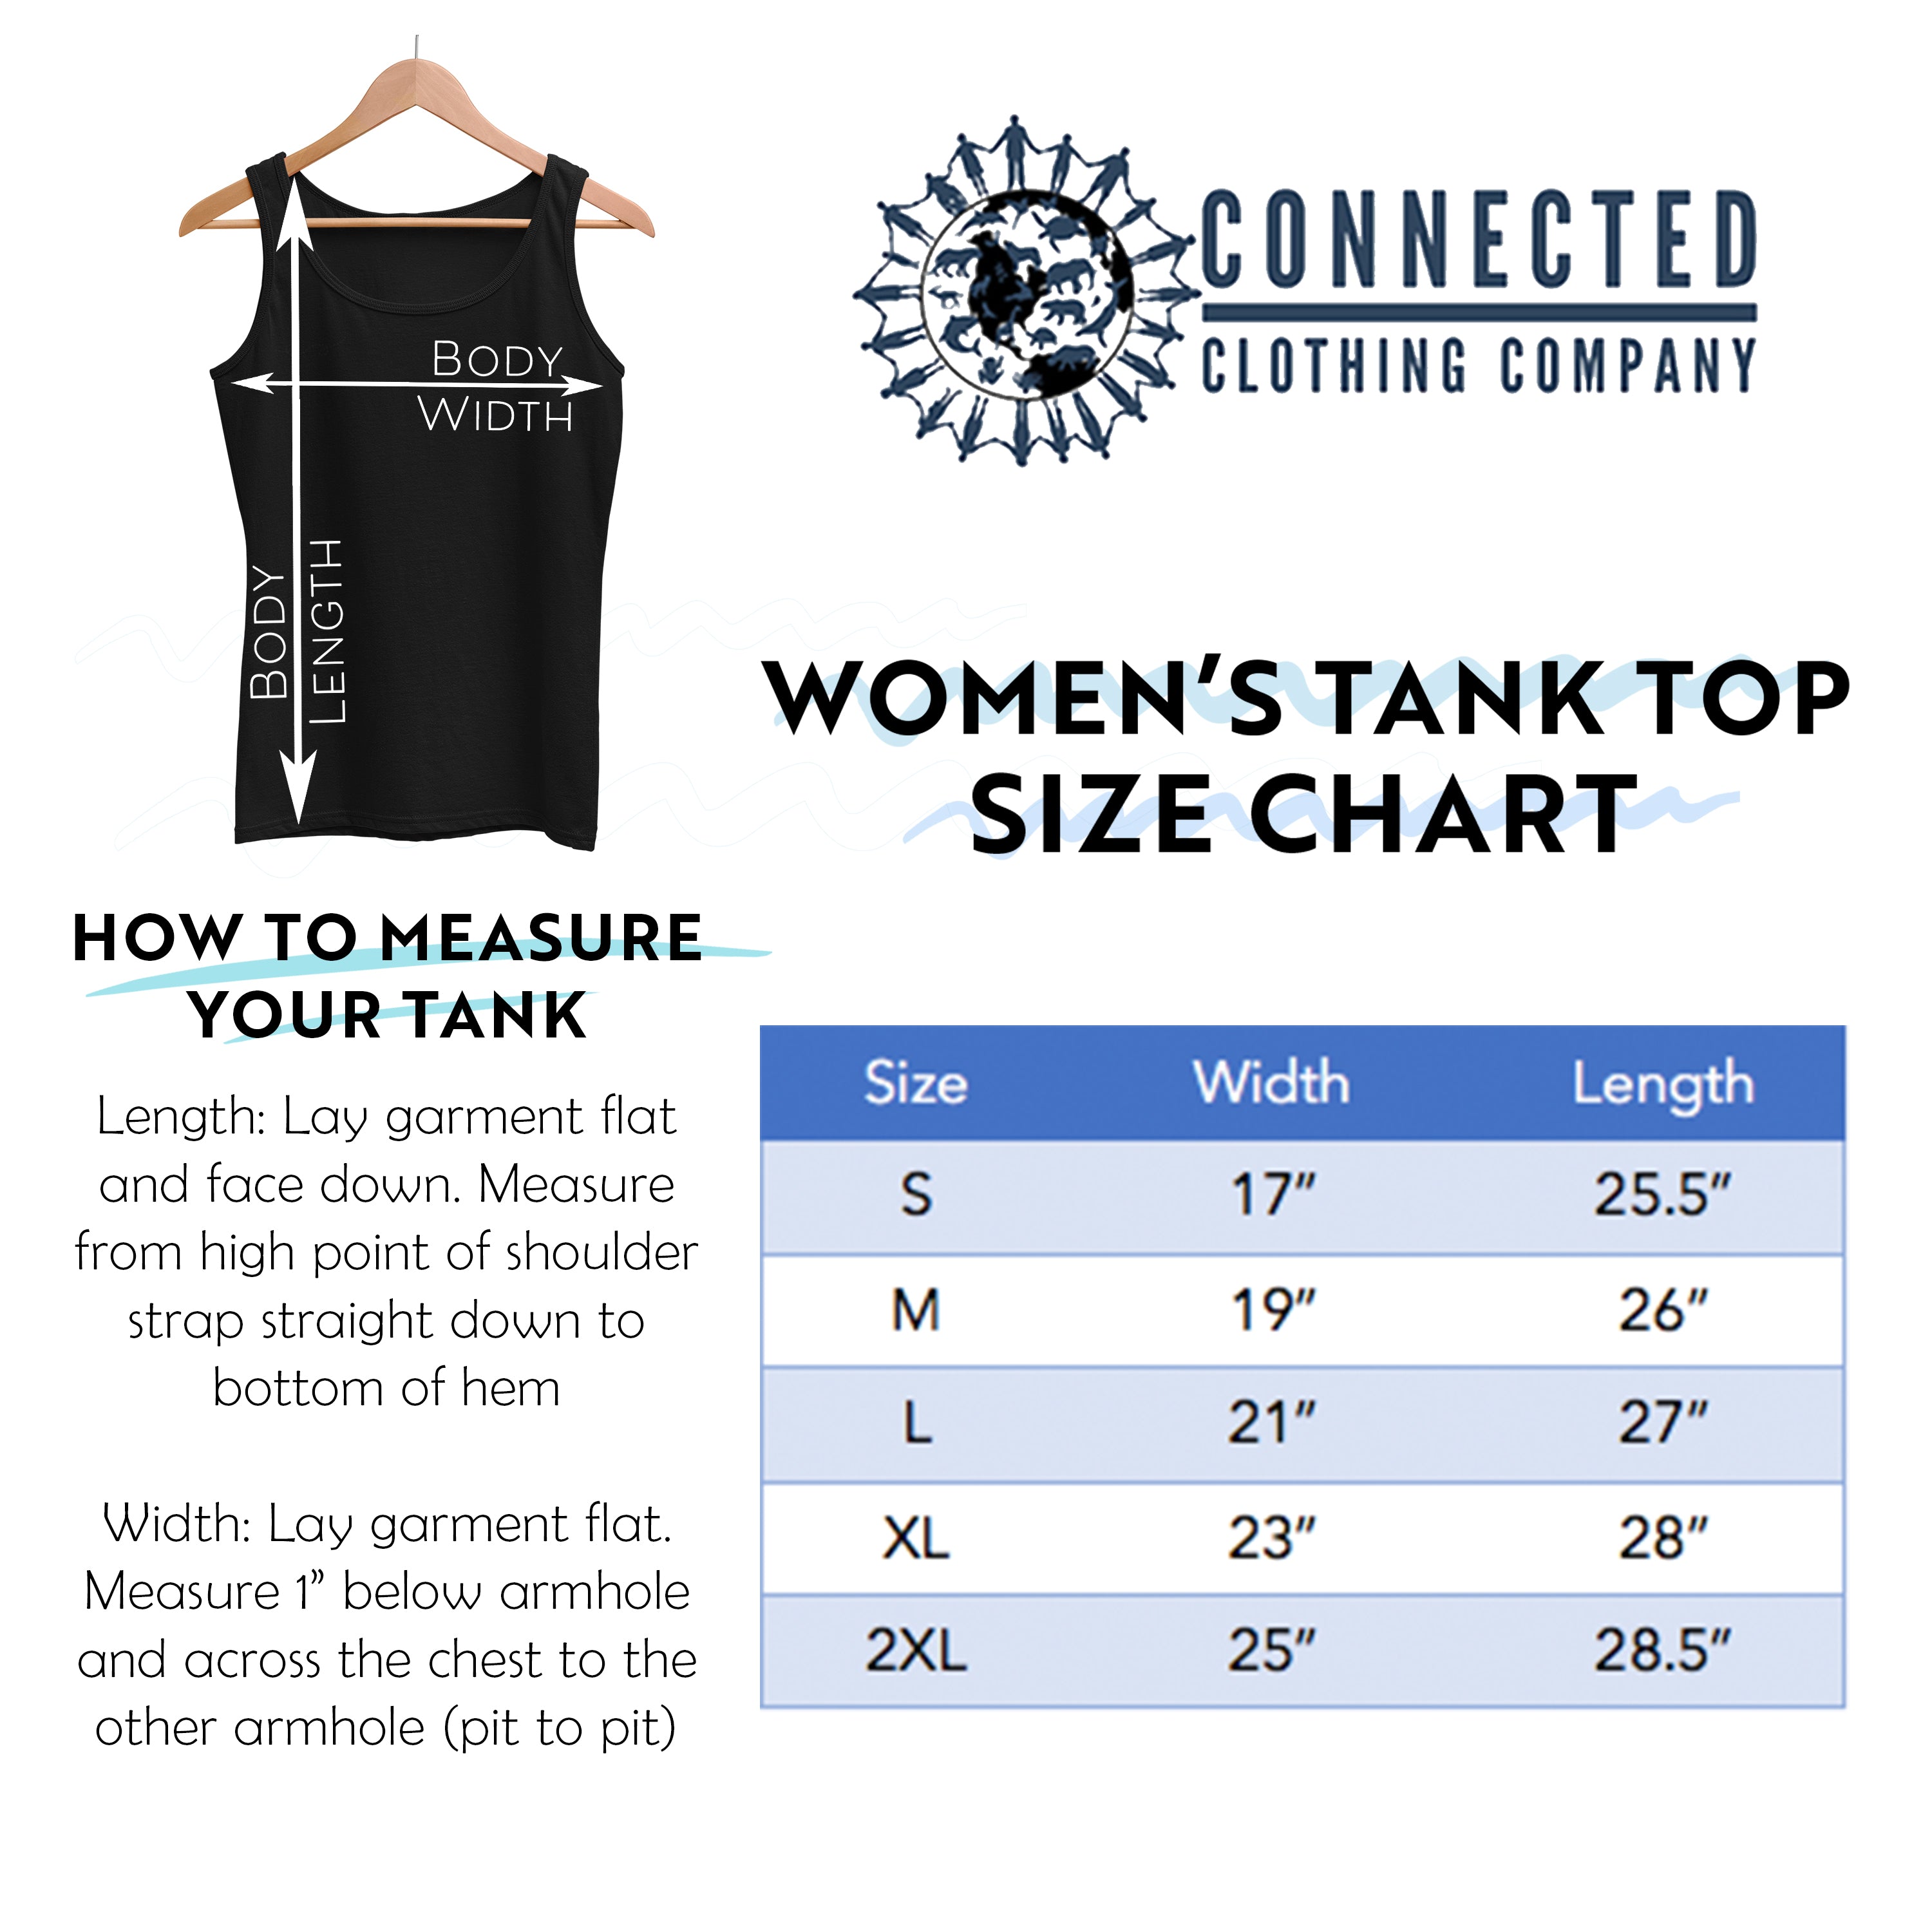 Women's Relaxed Tank Top Size Chart - sweetsherriloudesigns - Ethically and Sustainably Made - 10% donated to Mission Blue ocean conservation